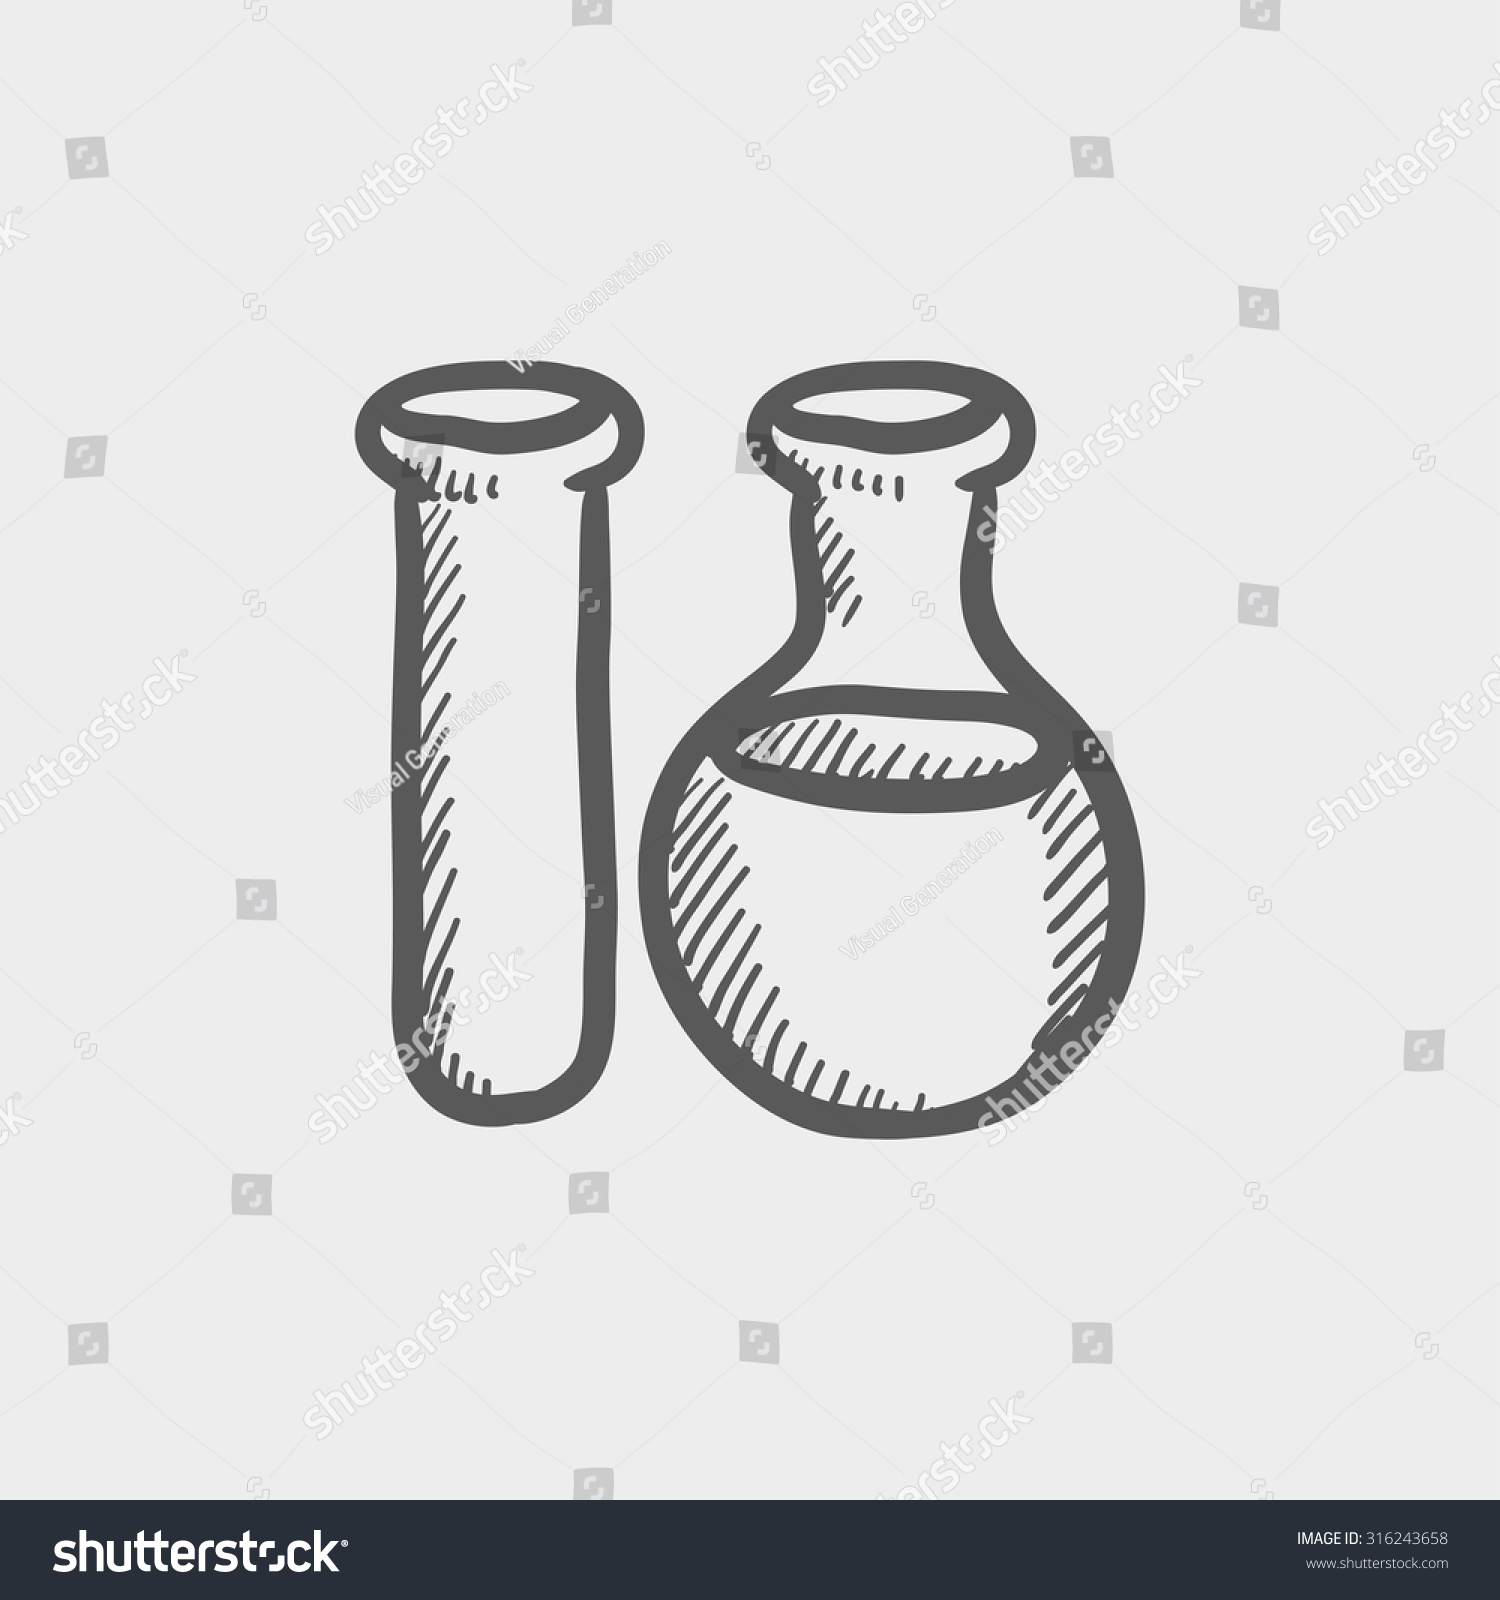 Test Tubes Sketch Icon Web Mobile Stock Vector (Royalty Free) 316243658